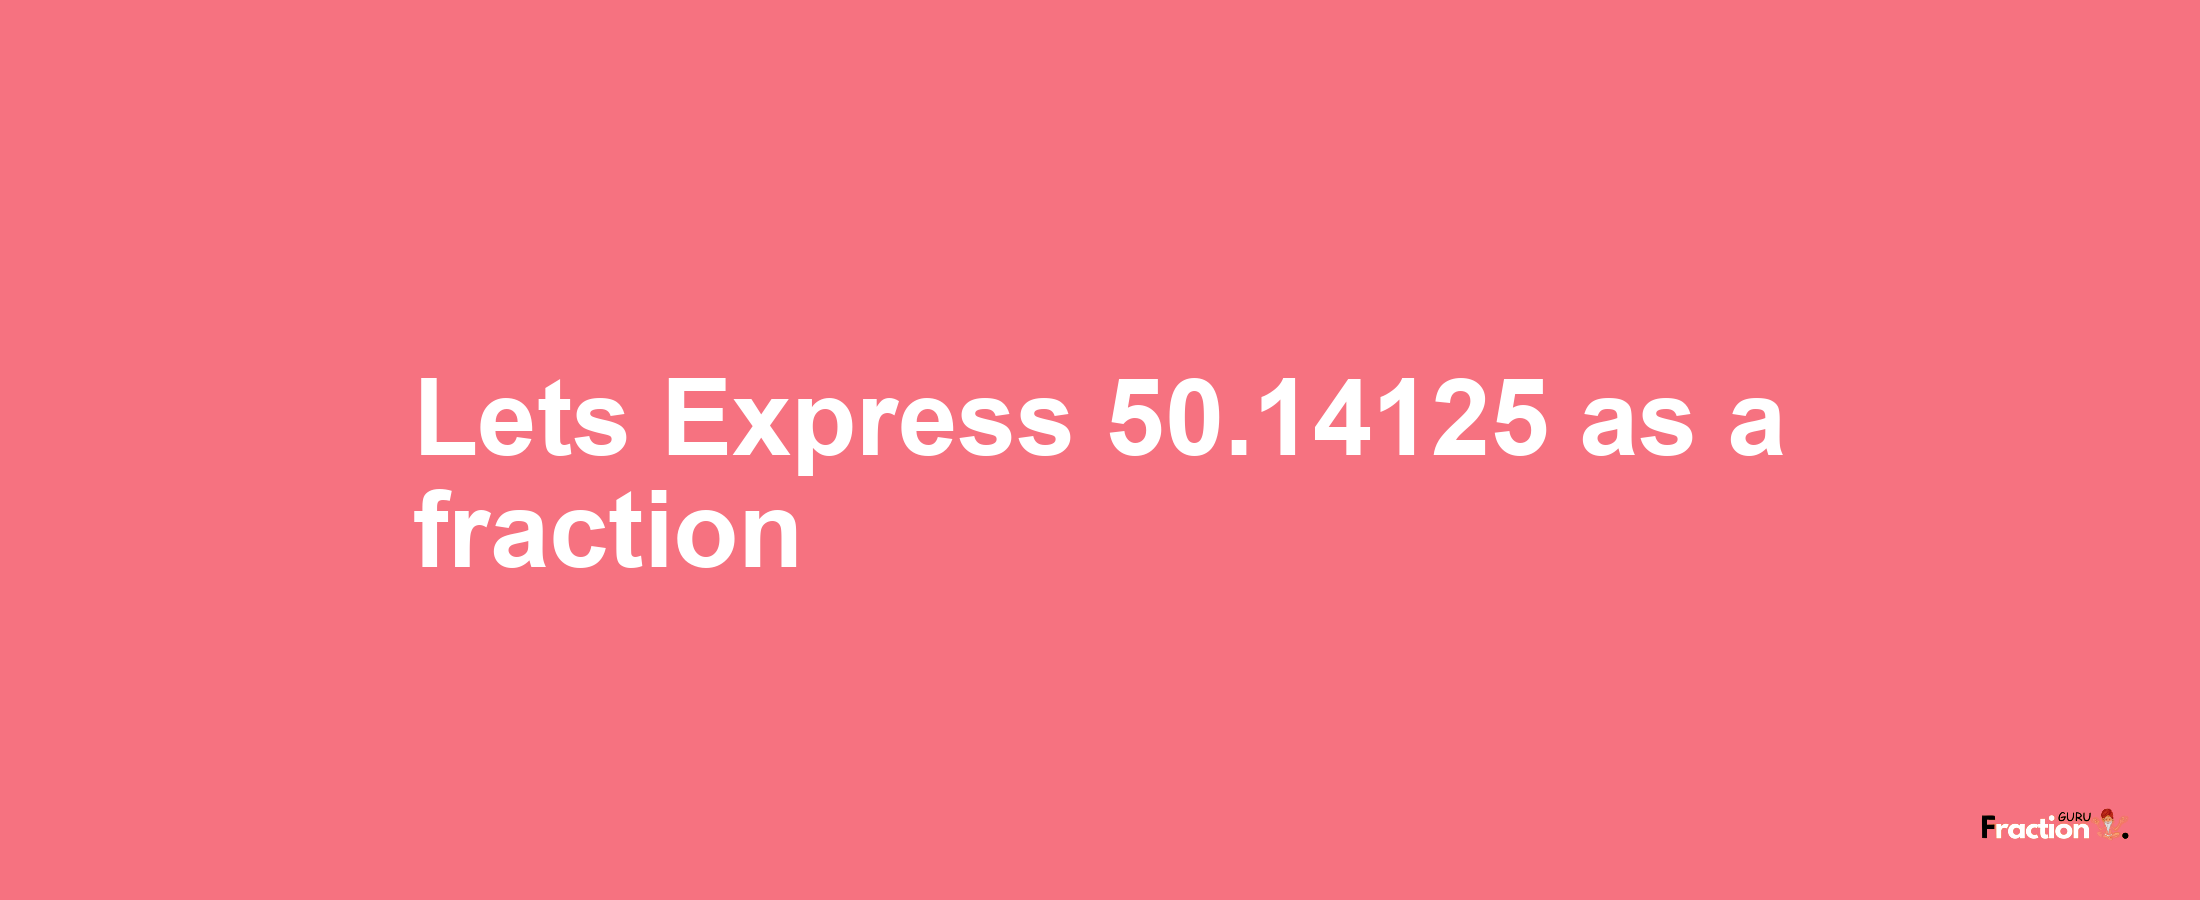 Lets Express 50.14125 as afraction